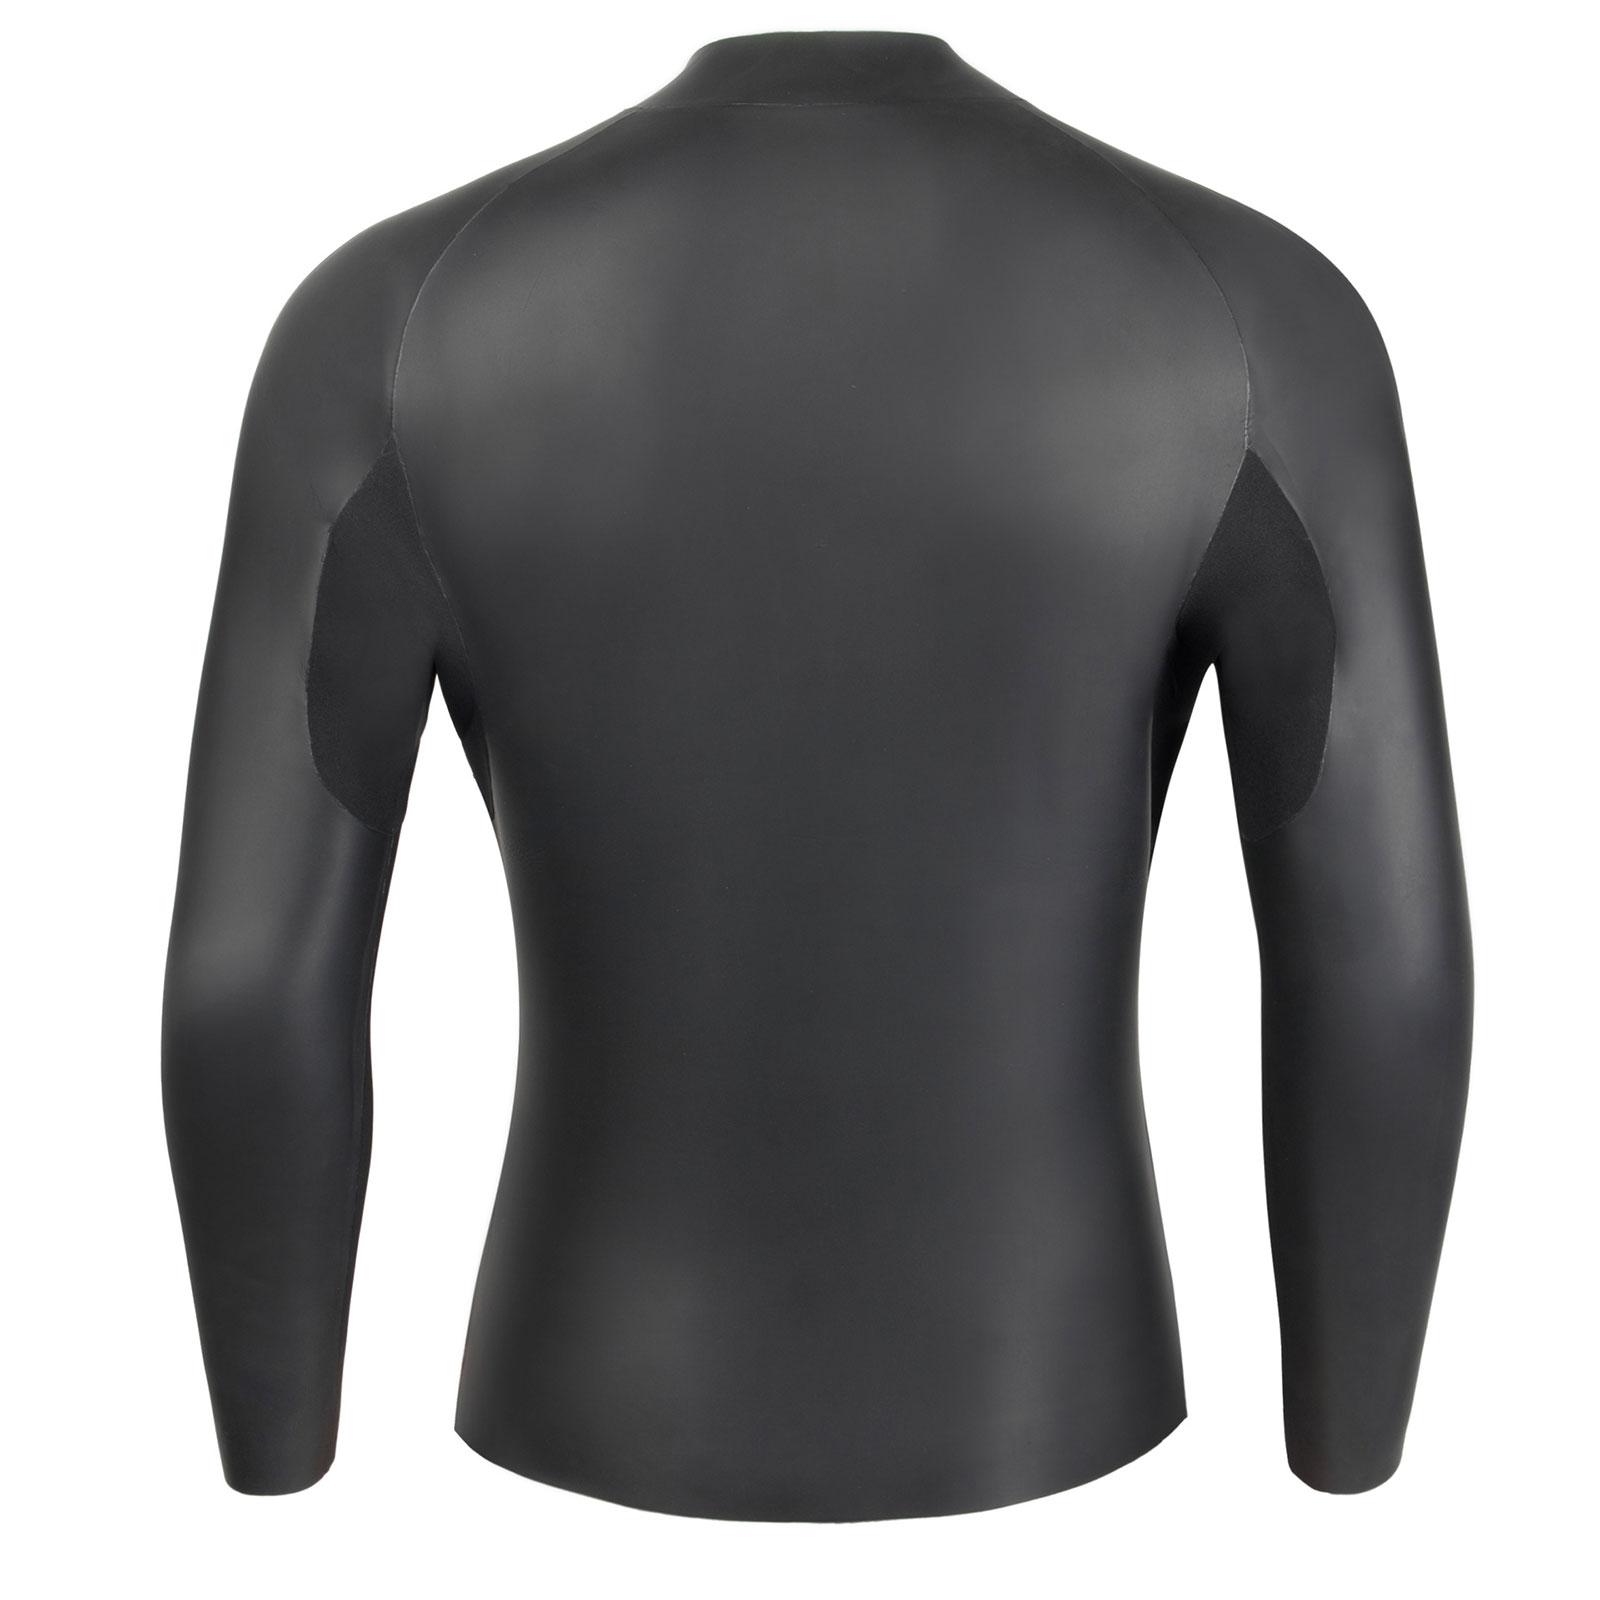 Wetsuit Top 3mm with Zipper Diving Suit for Underwater Kayaking Water Sports M